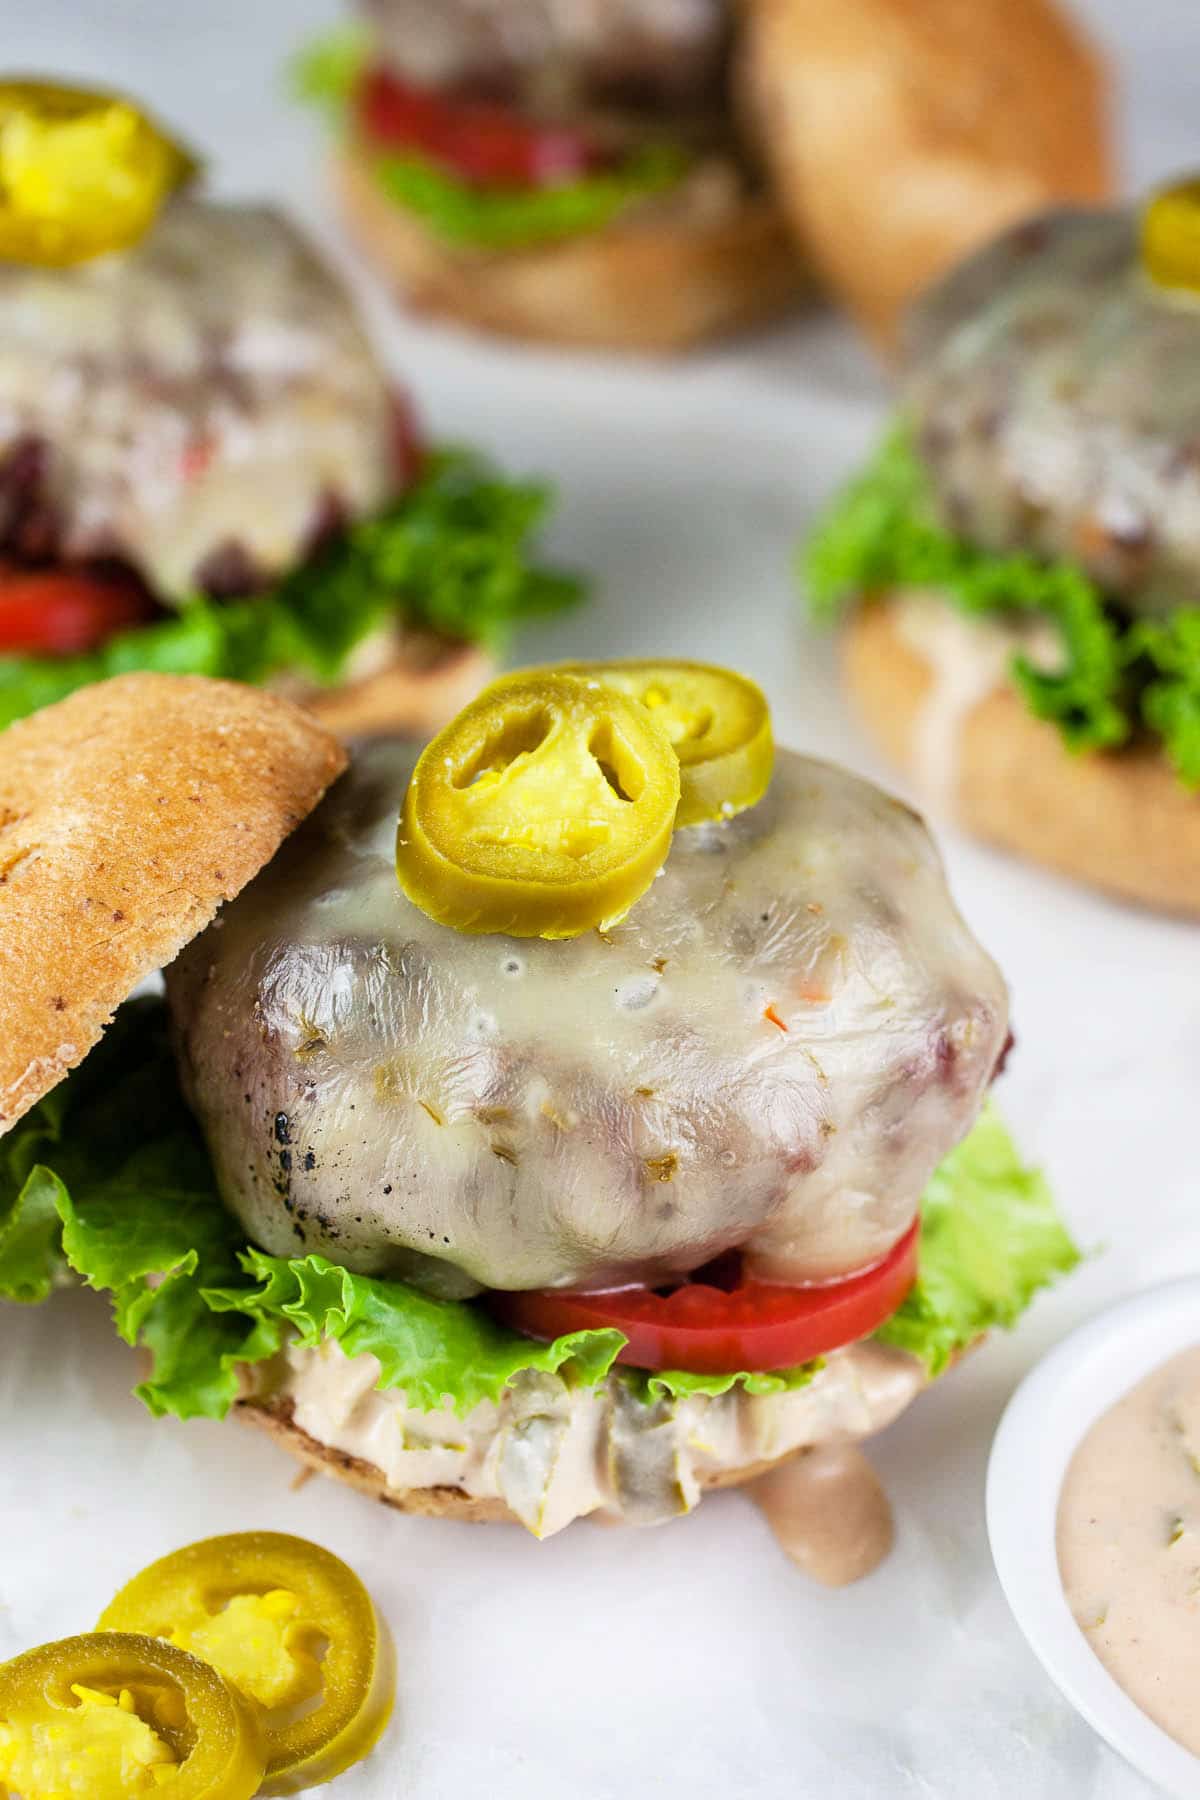 Open faced grilled burgers with jalapeno sauce.